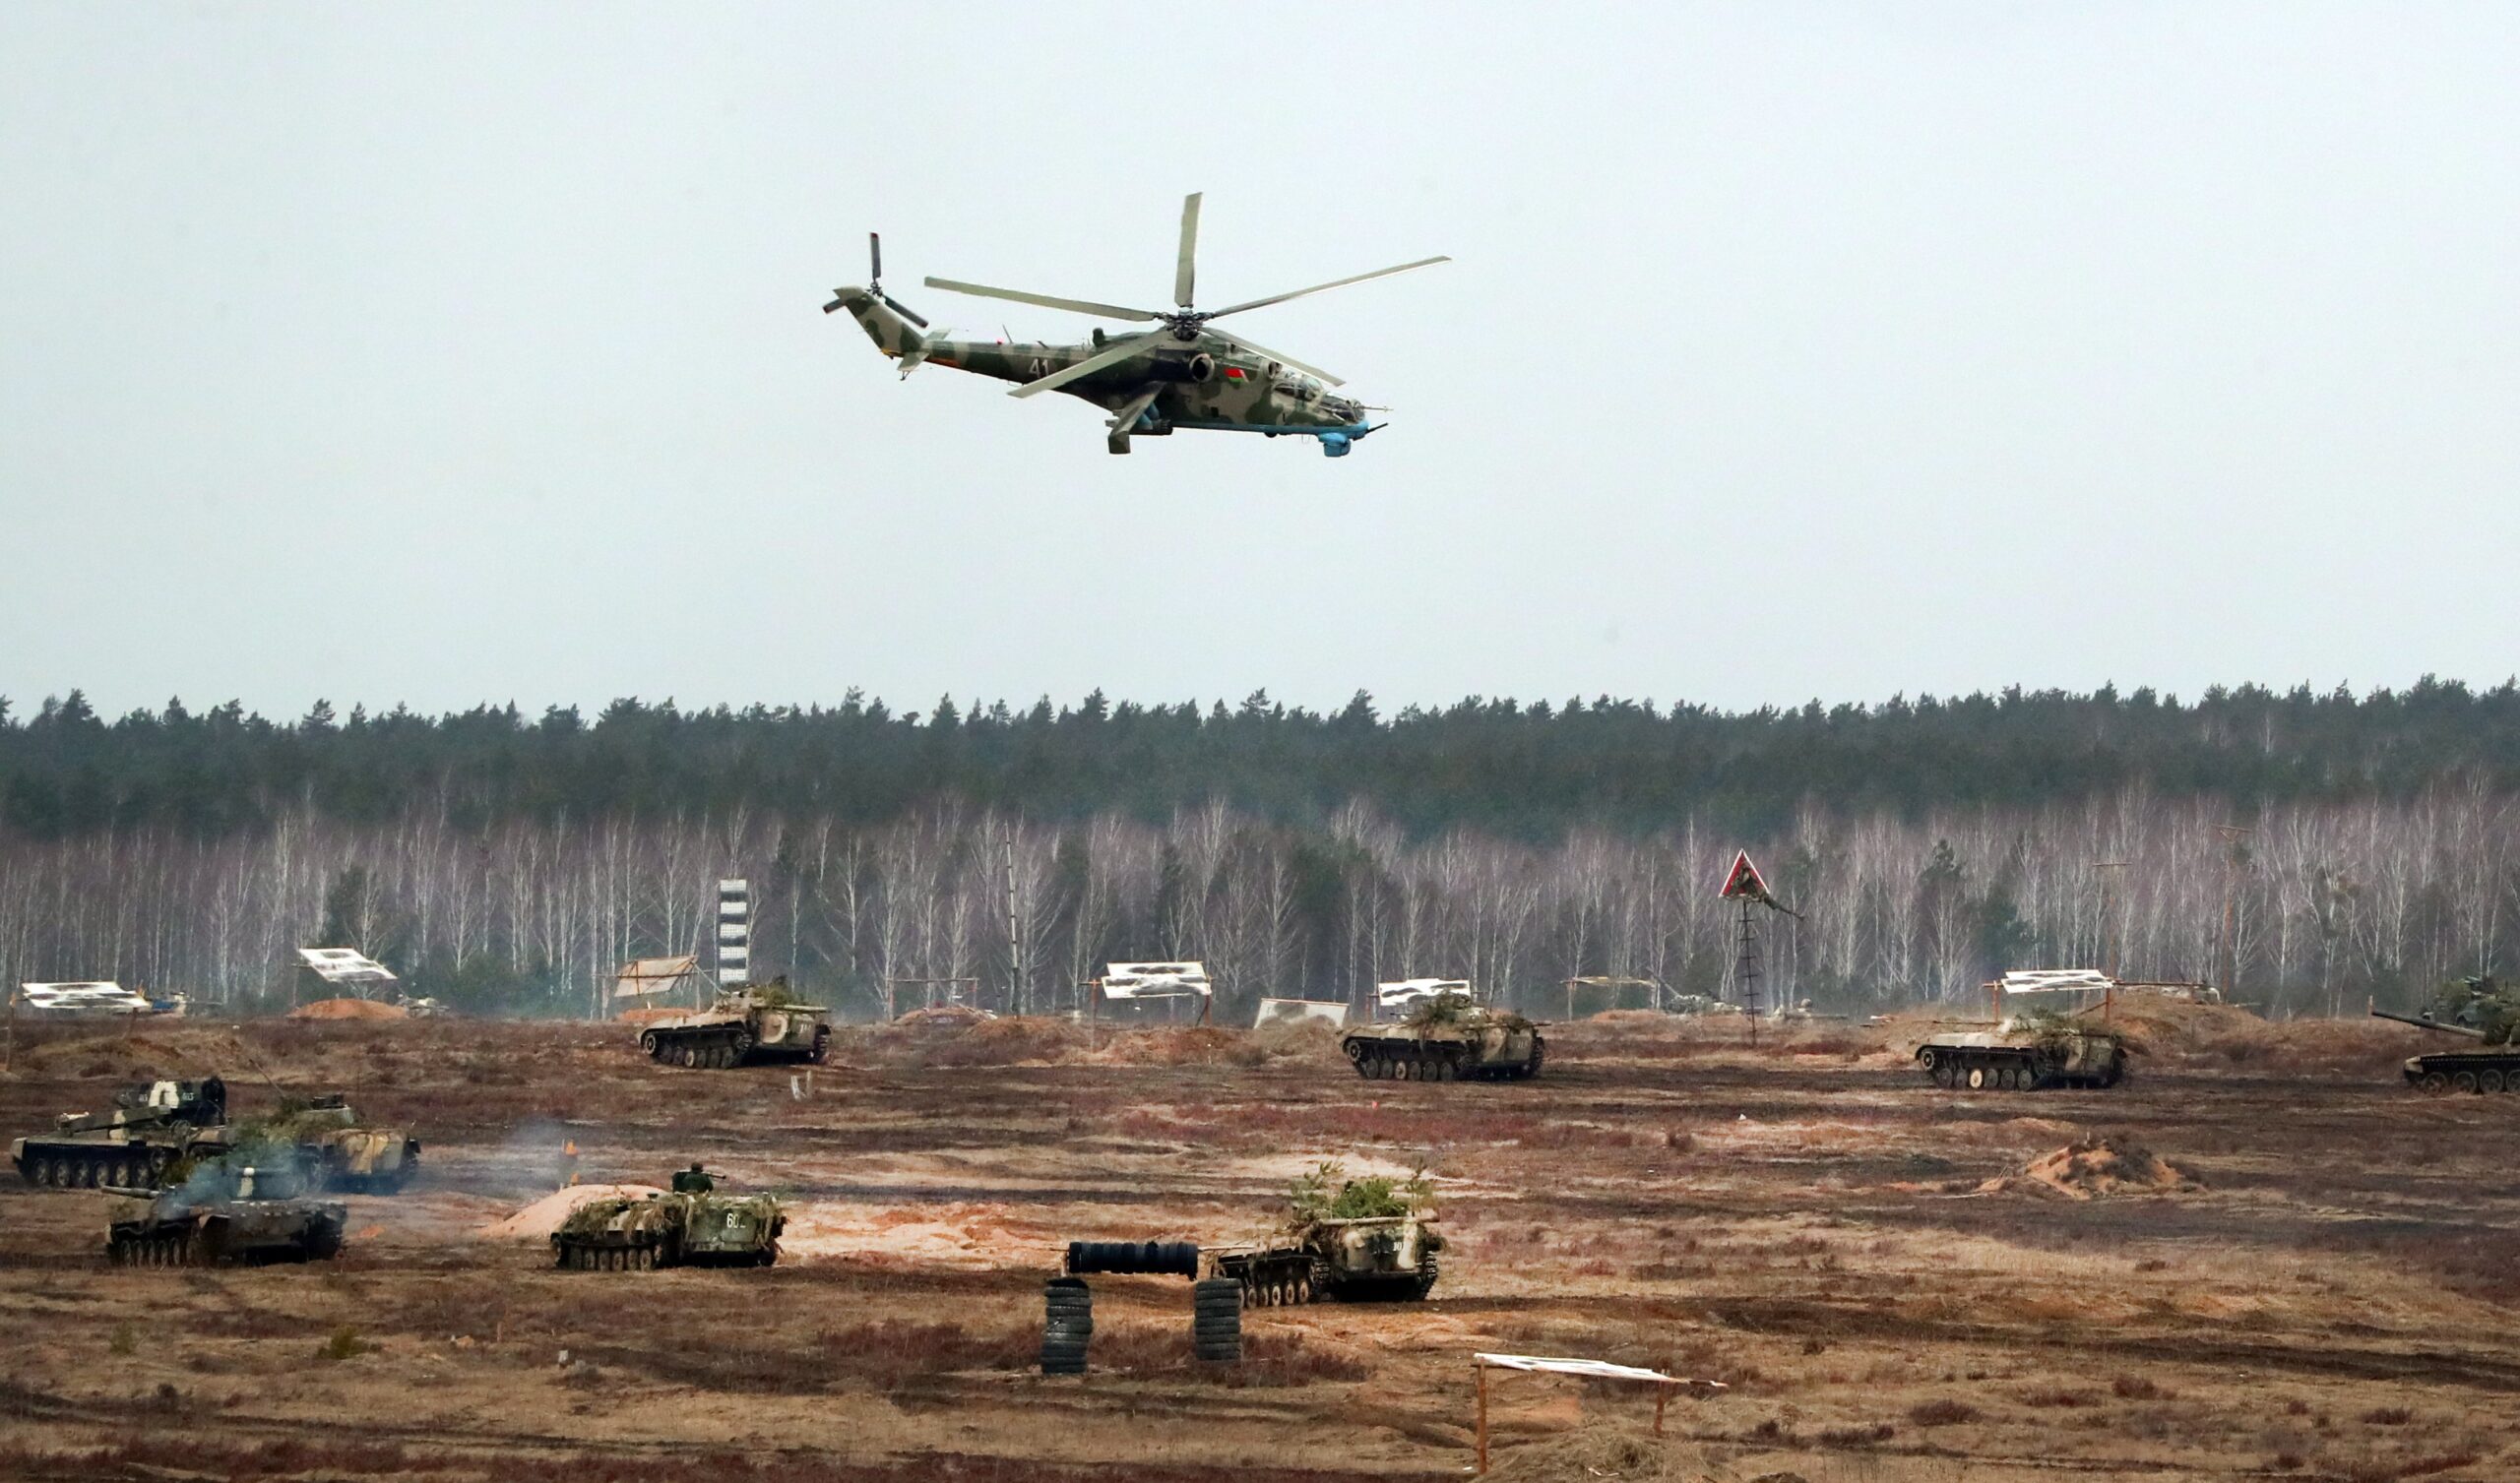 In a photo that emphasizes the close military relationship between Moscow and Minsk, Russian and Belarusian troops take part in Exercise Allied Resolve 2022, in Belarus. <em>Photo by Henadz Zhinkov/Xinhua via Getty Images</em>